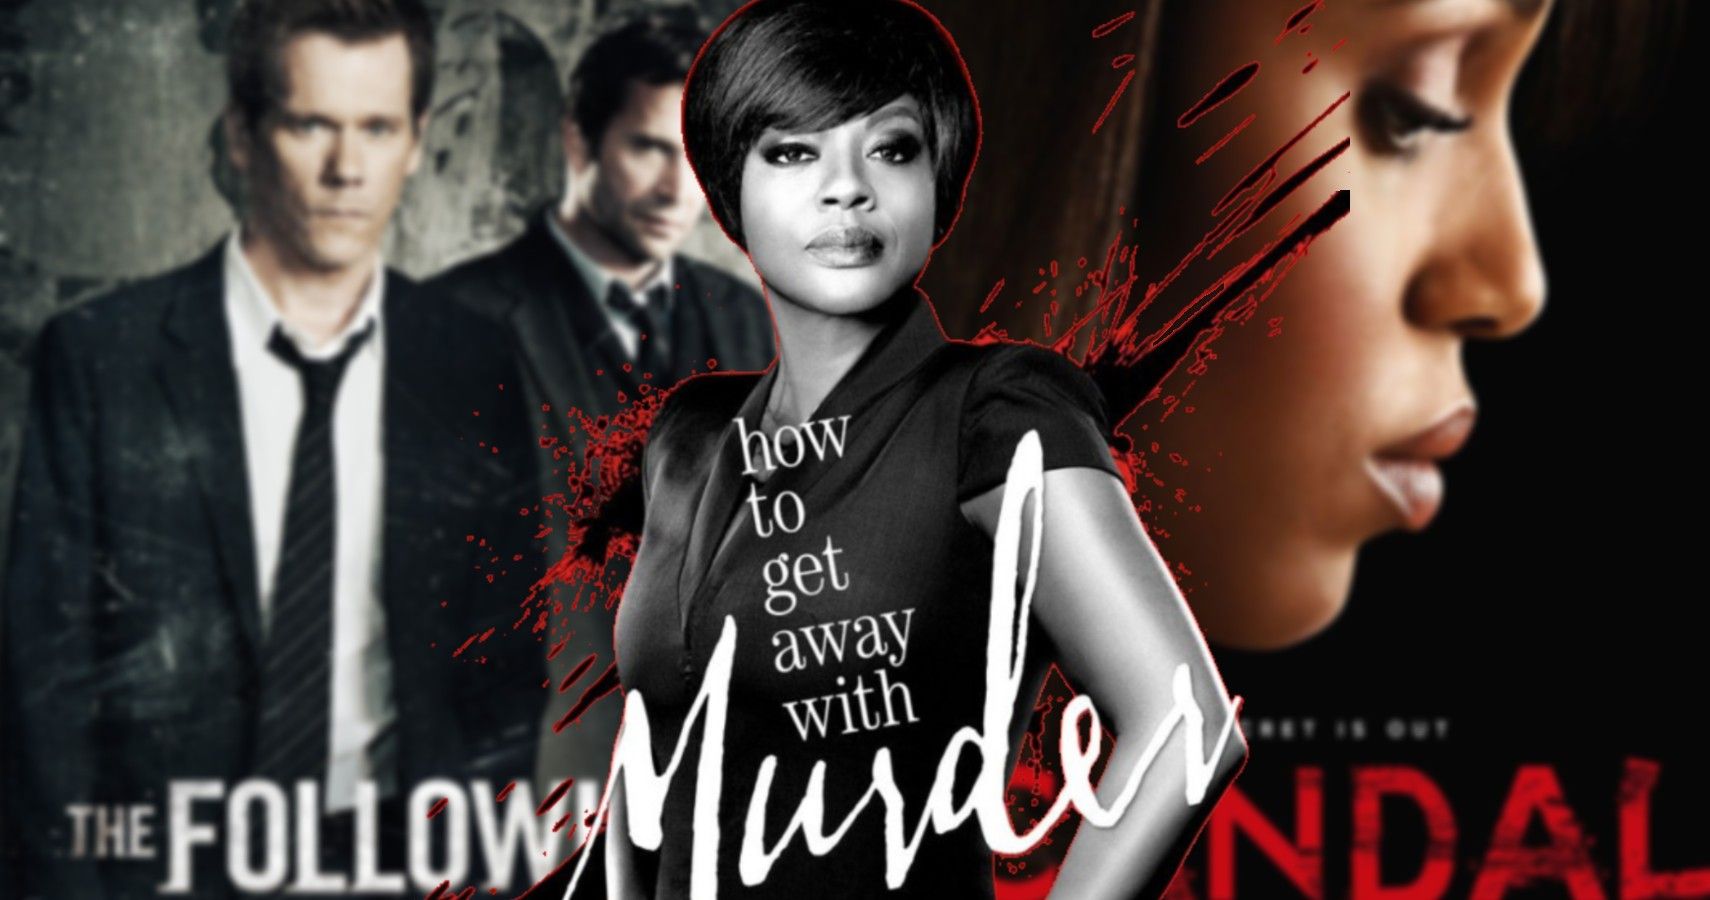 A blended image features characters from The Following, How to Get Away With Murder, and Scandal